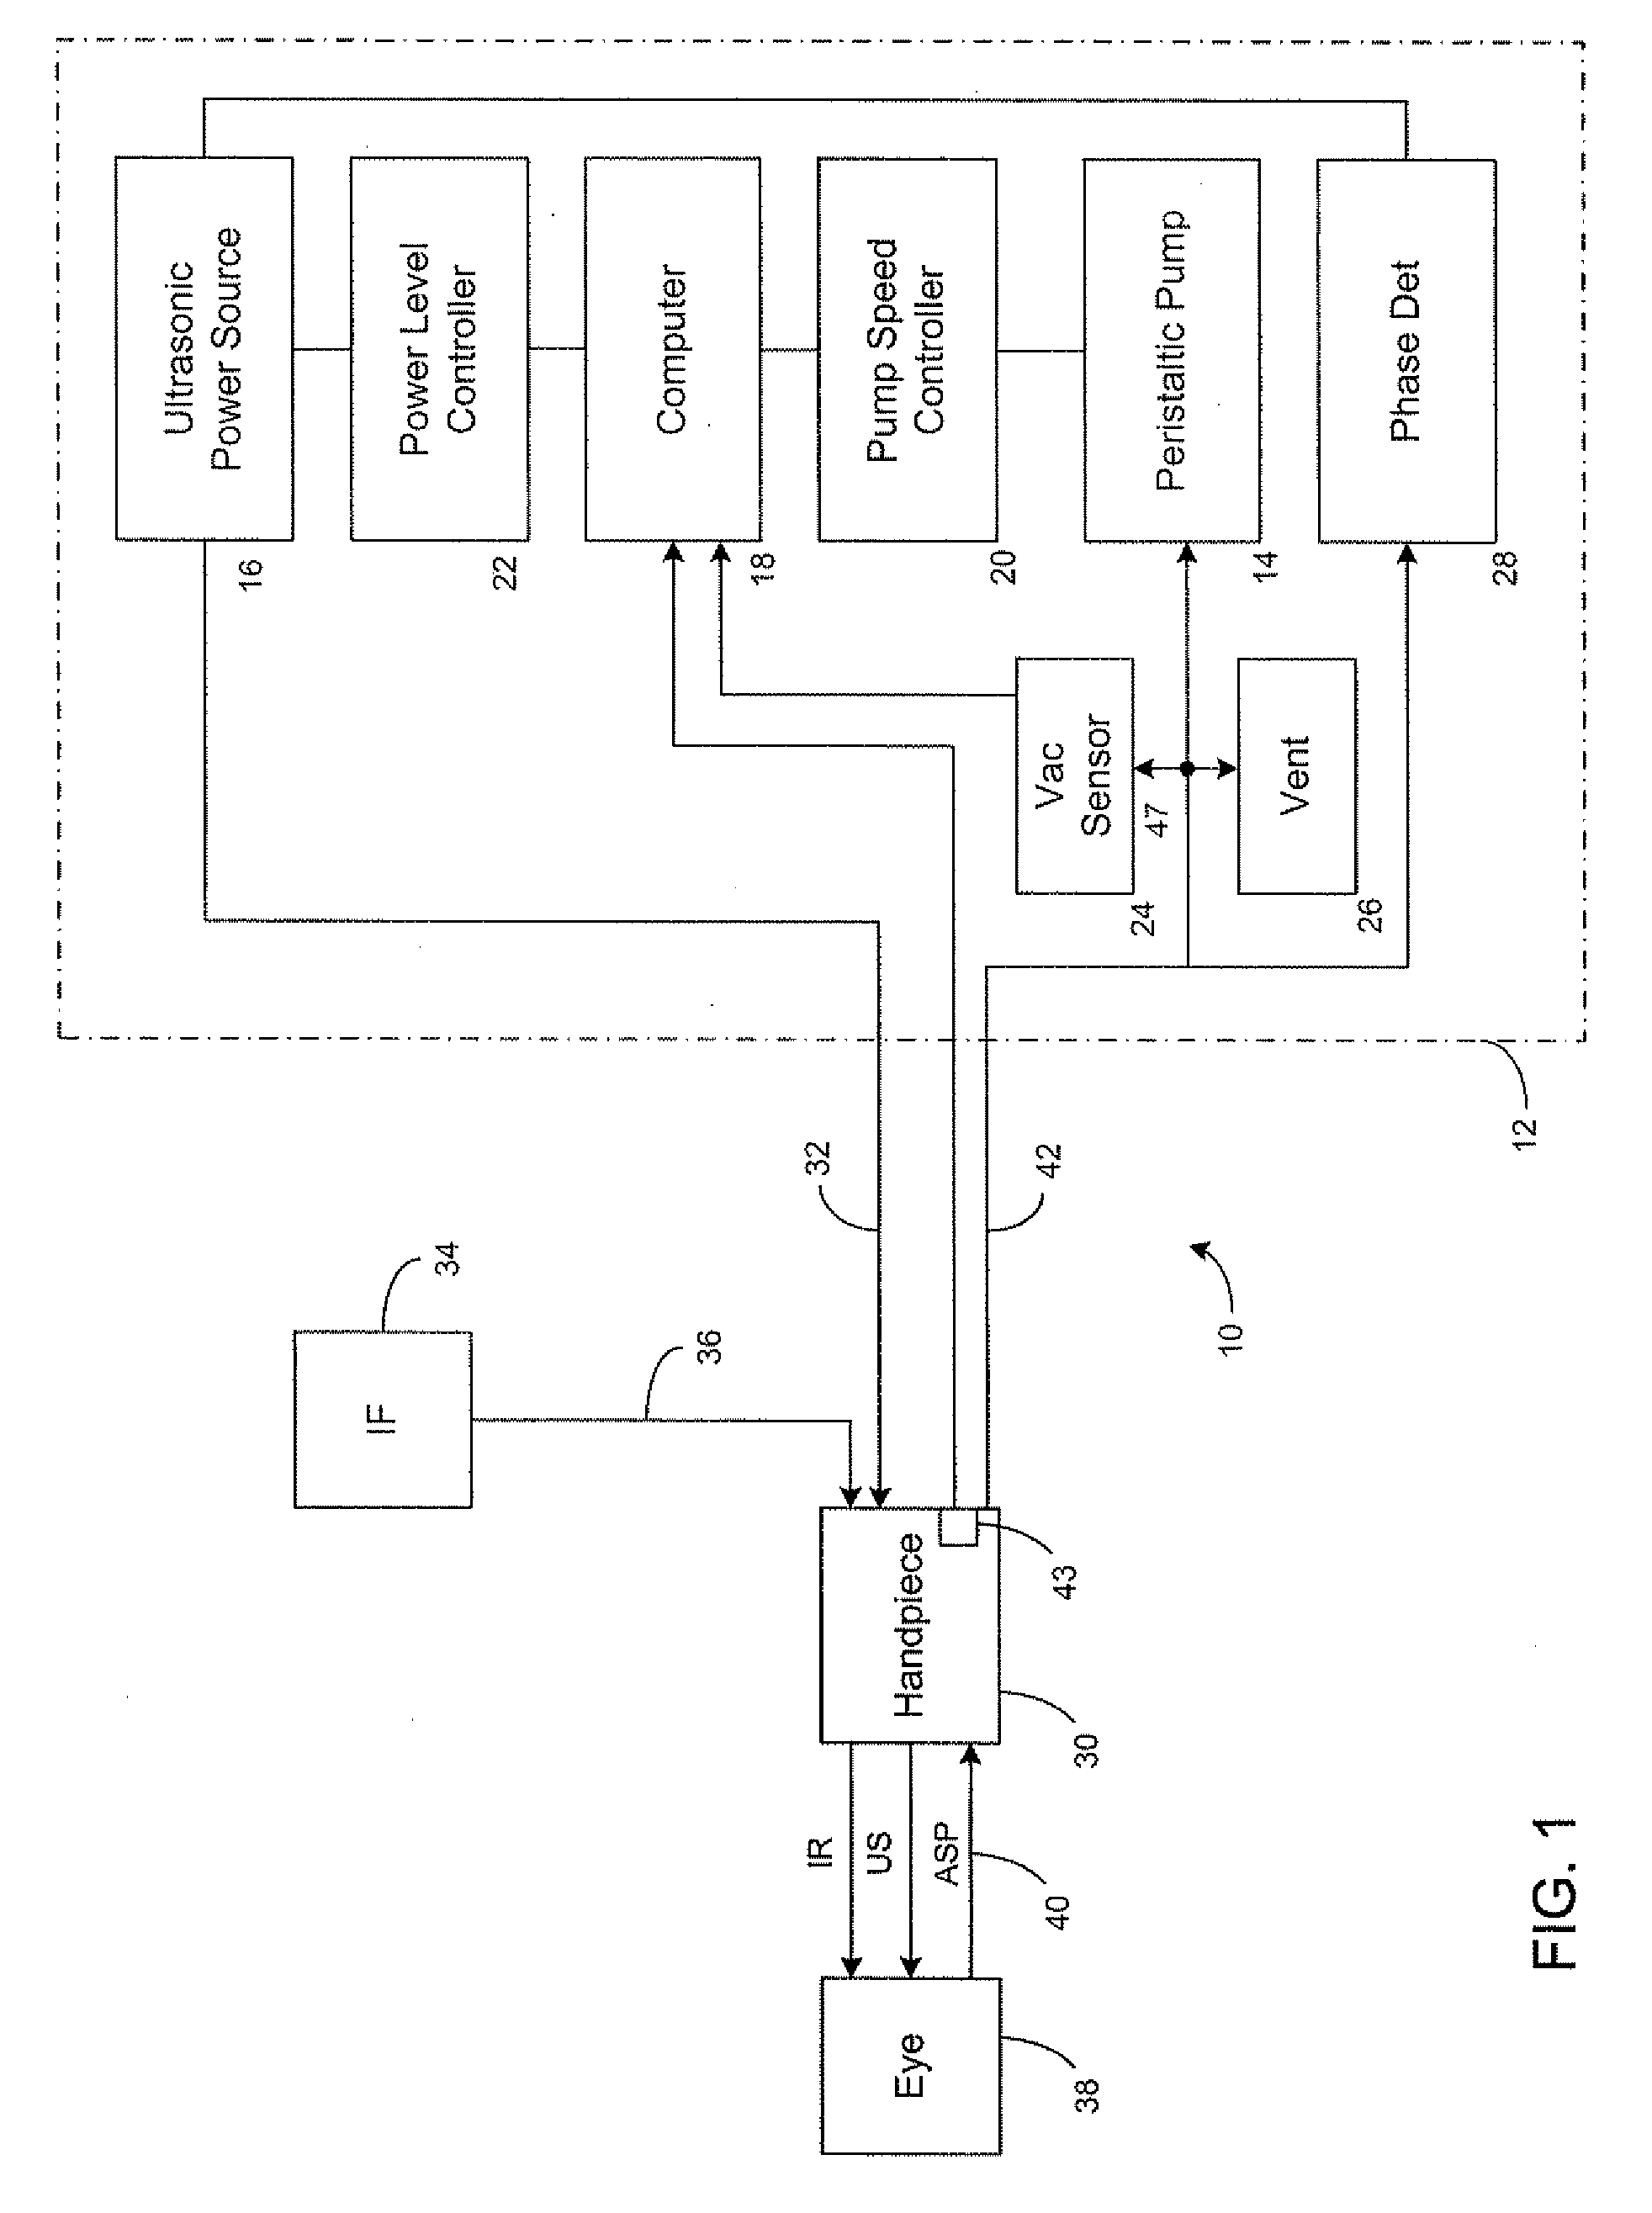 Calibration utility for non-linear measurement system